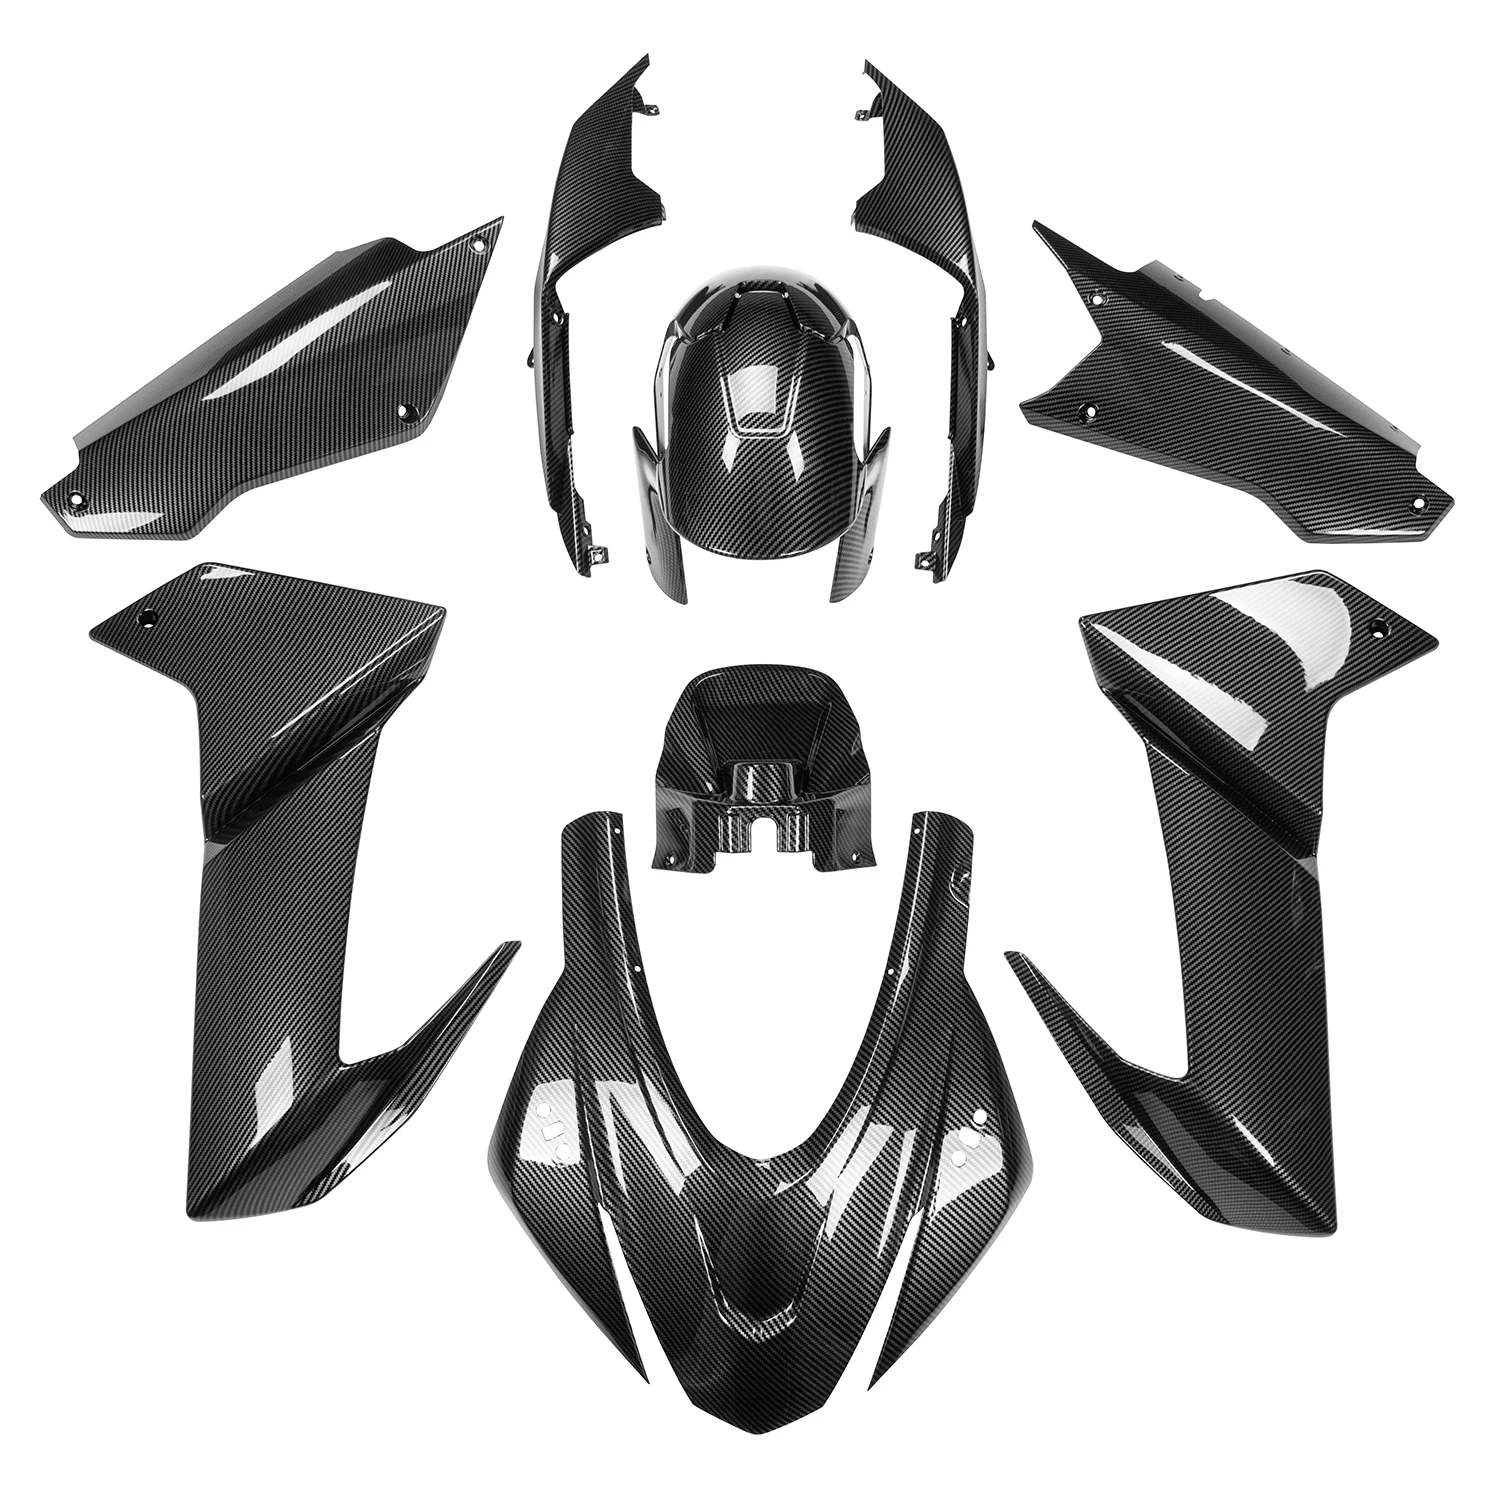 

RS660 Motorcycle ASB Plastic Complete Fairing Injection Molding Kits For Aprilia RS 660 2020 2021 2022 2023 Full Set 9 Pieces